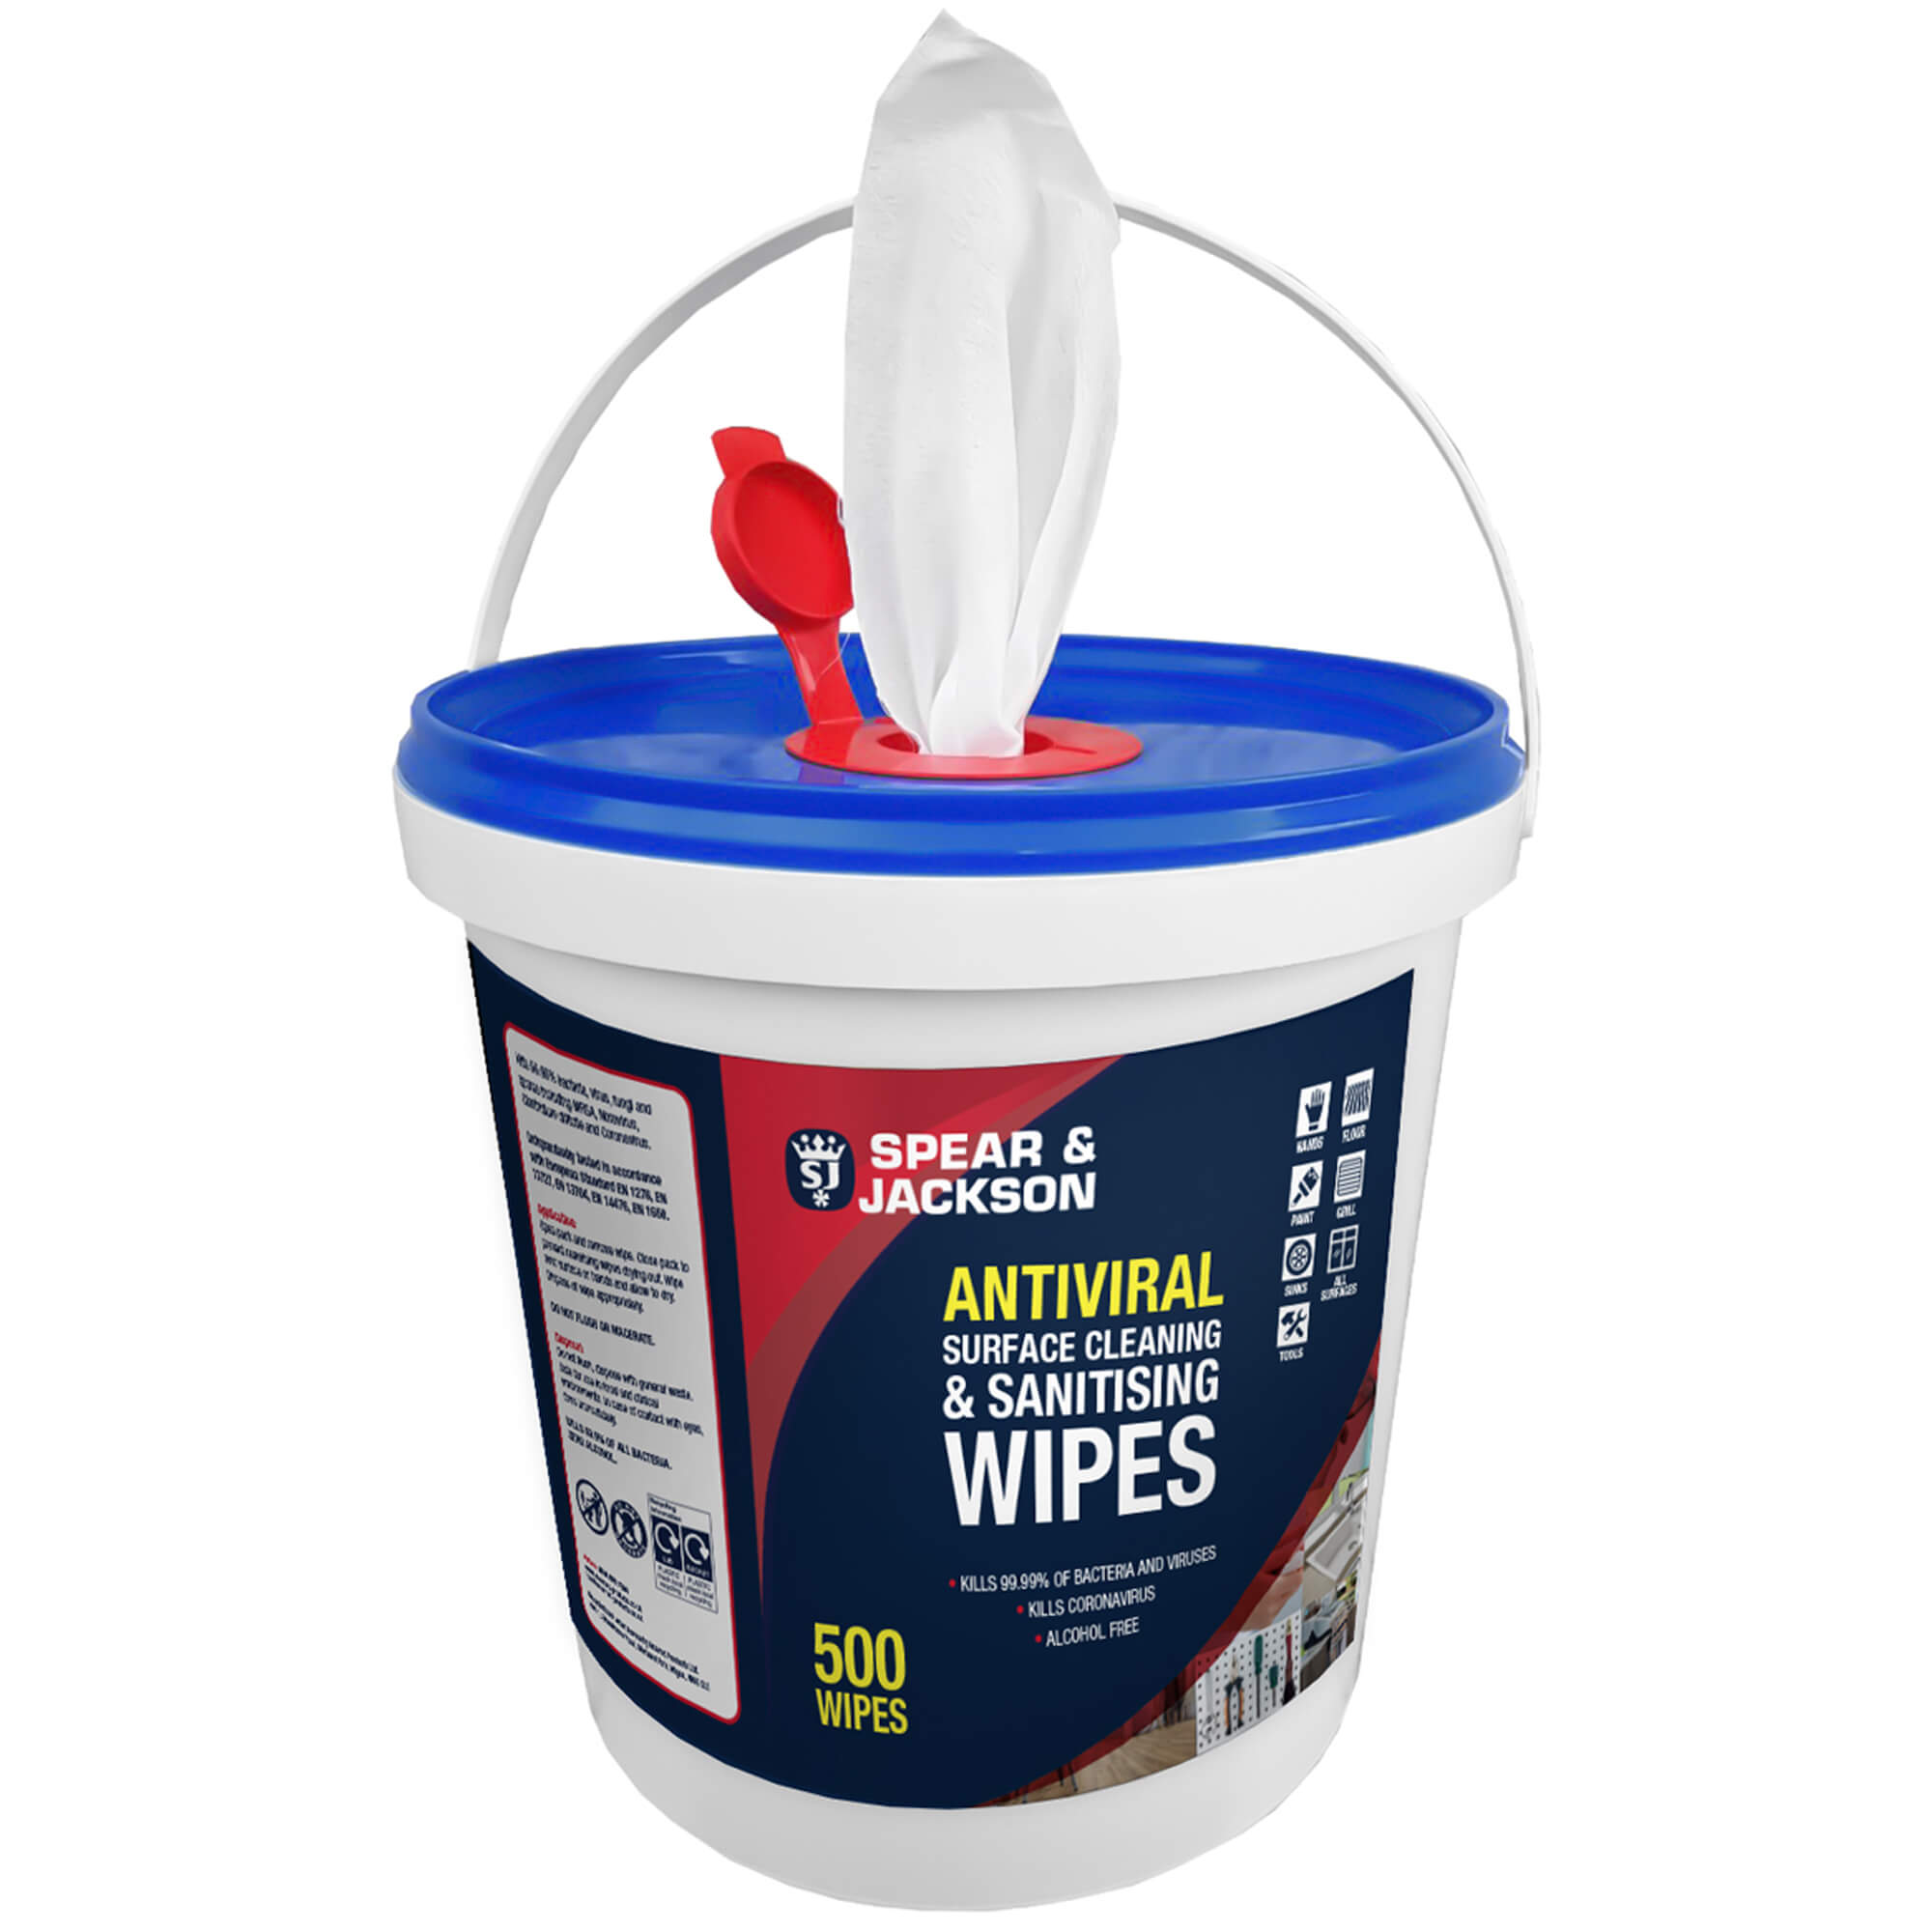 S&J Antiviral Surface Cleaning & Sanitising Wipes (500 wipes)